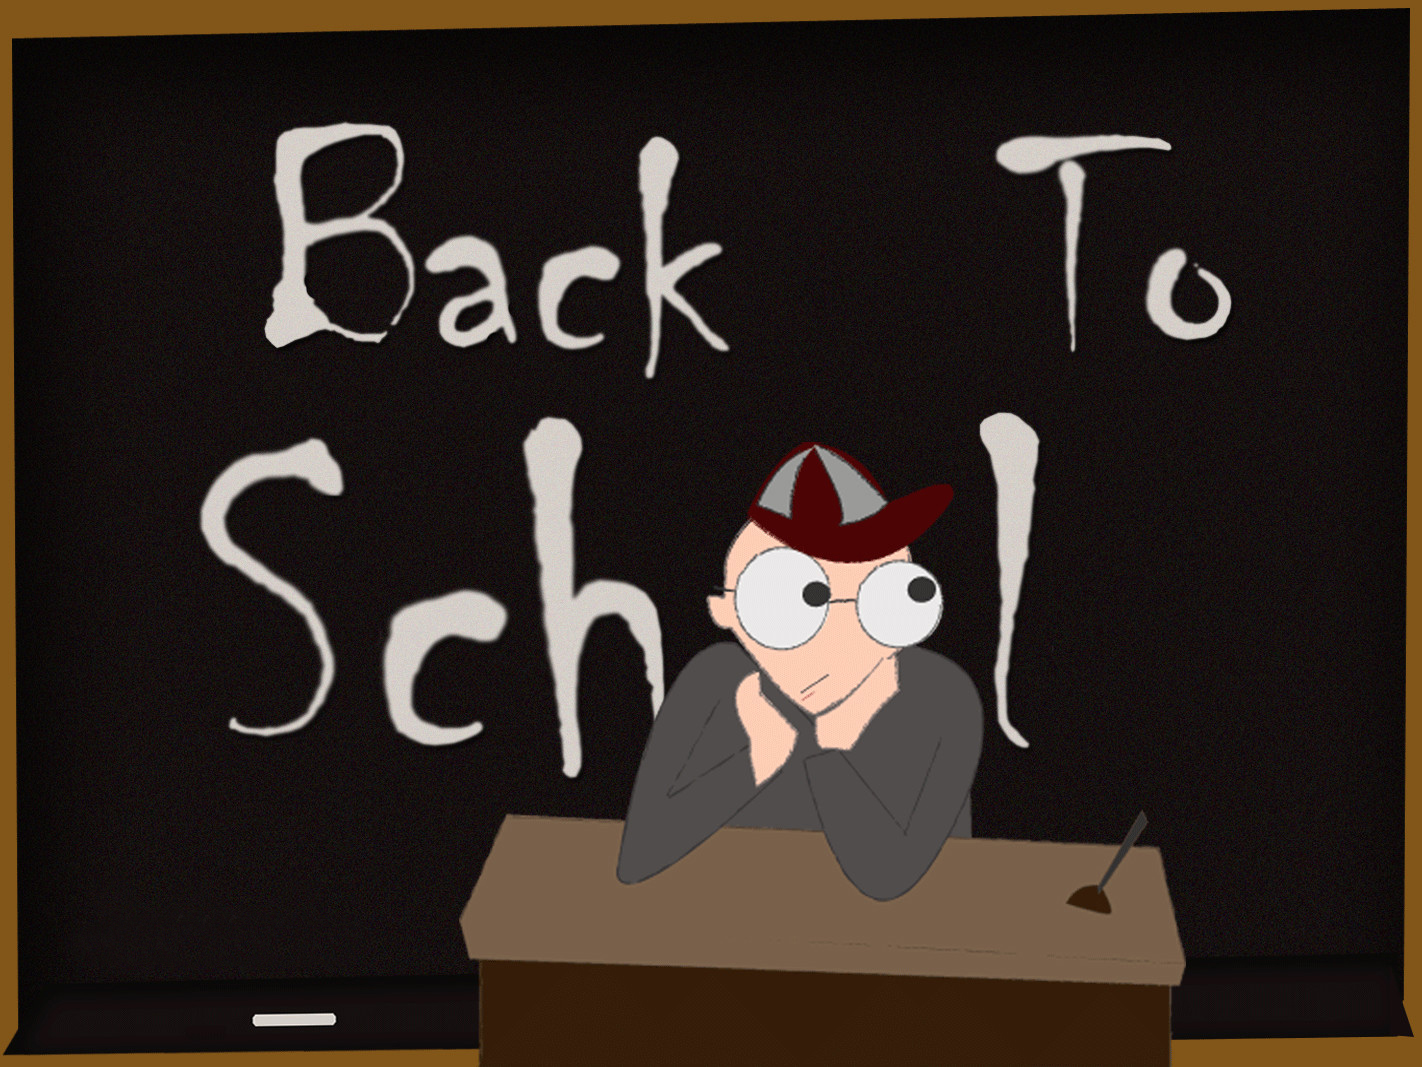 Back To School Wallpaper And Background